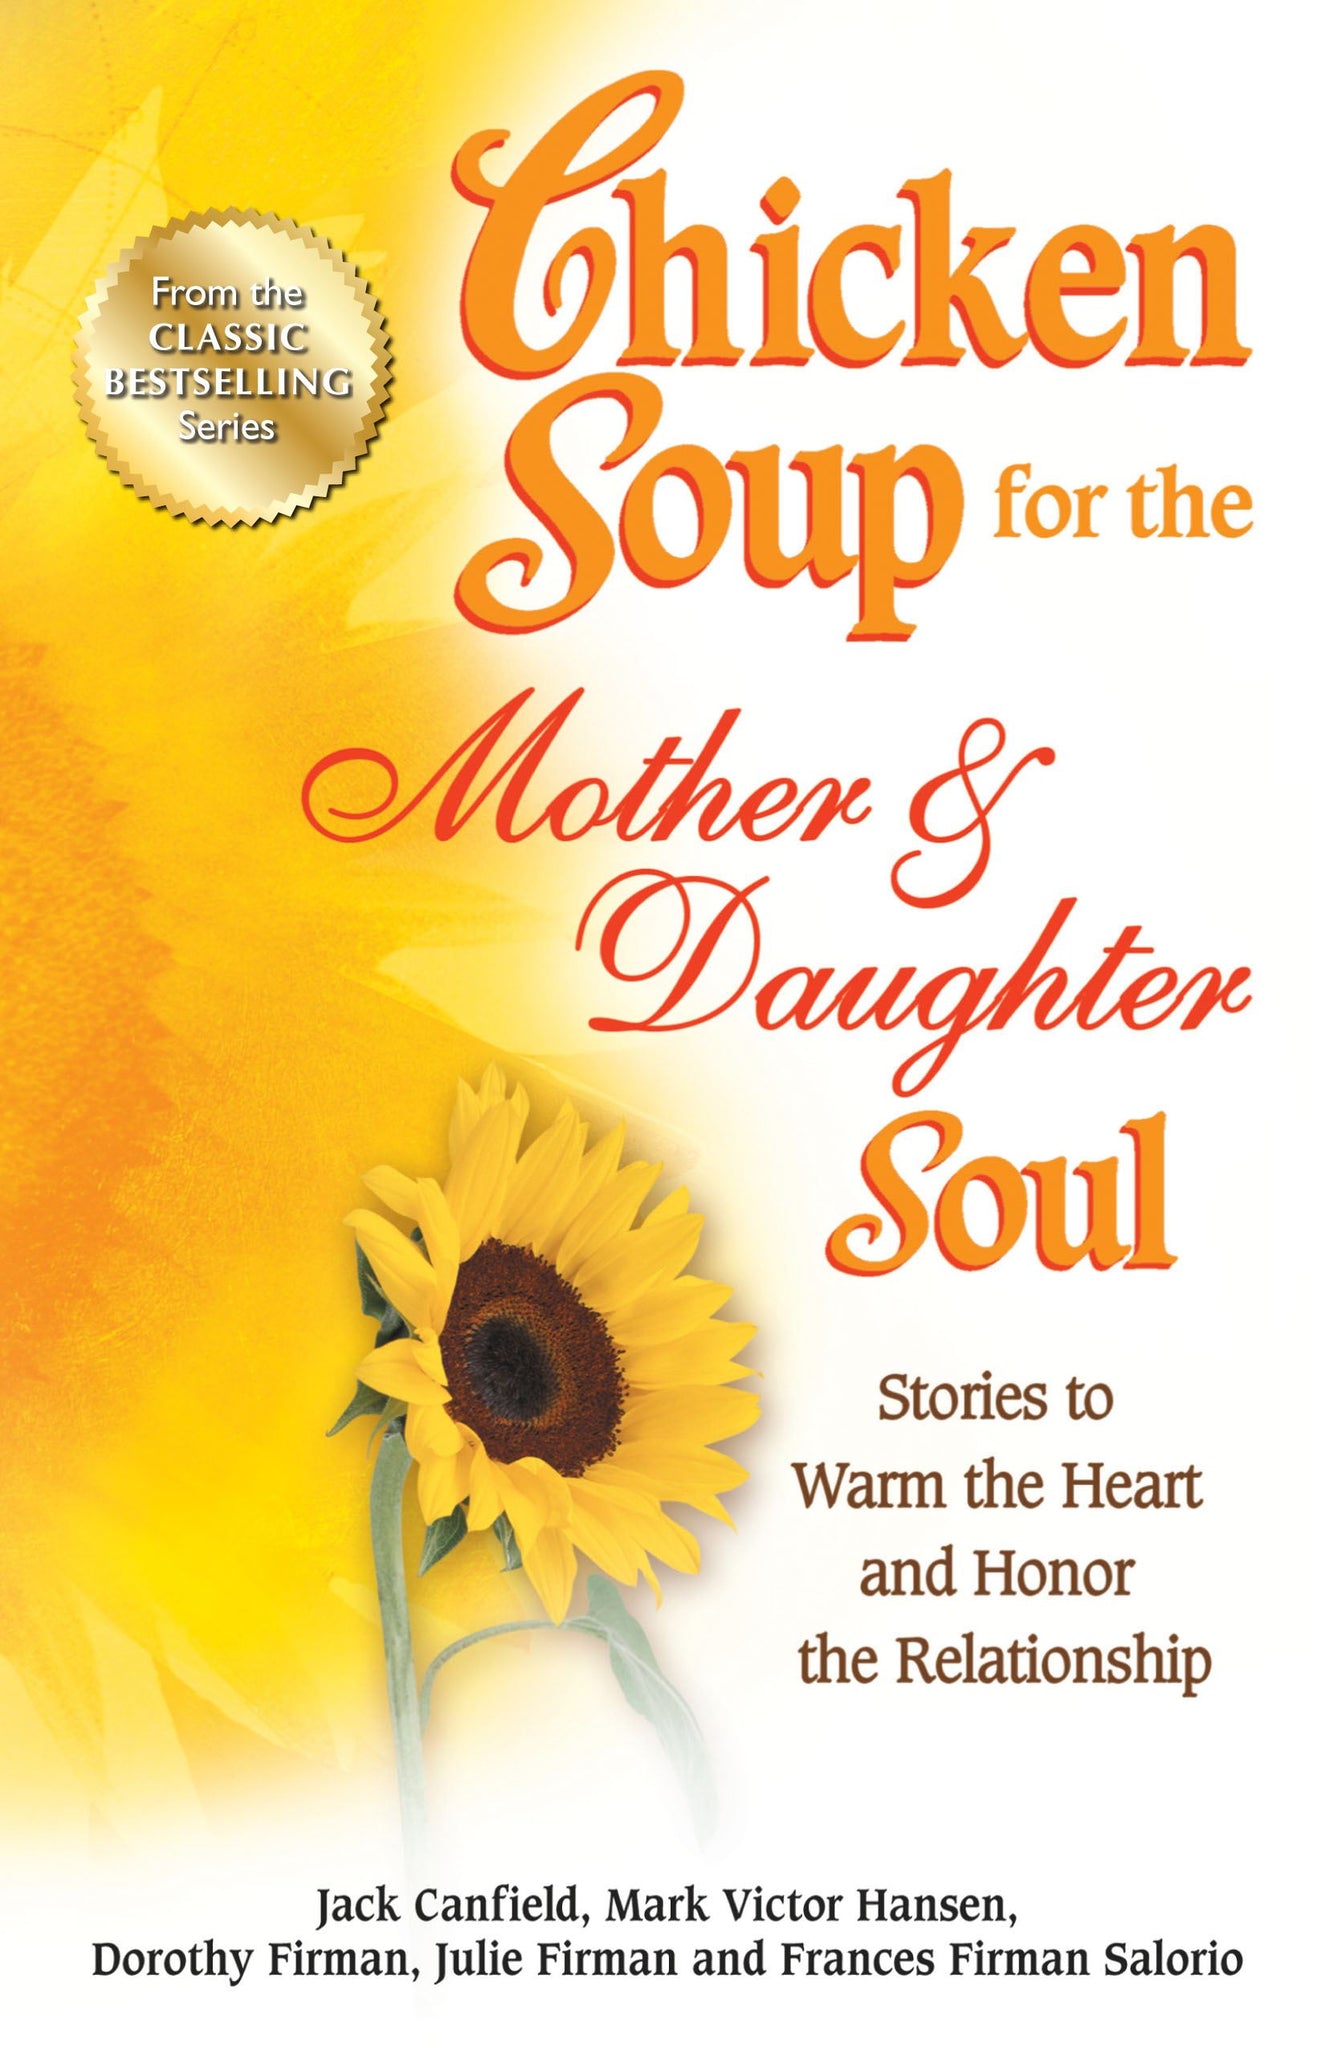 Chicken Soup for the Mother & Daughter Soul : Stories to Warm the Heart and Honor the Relationship